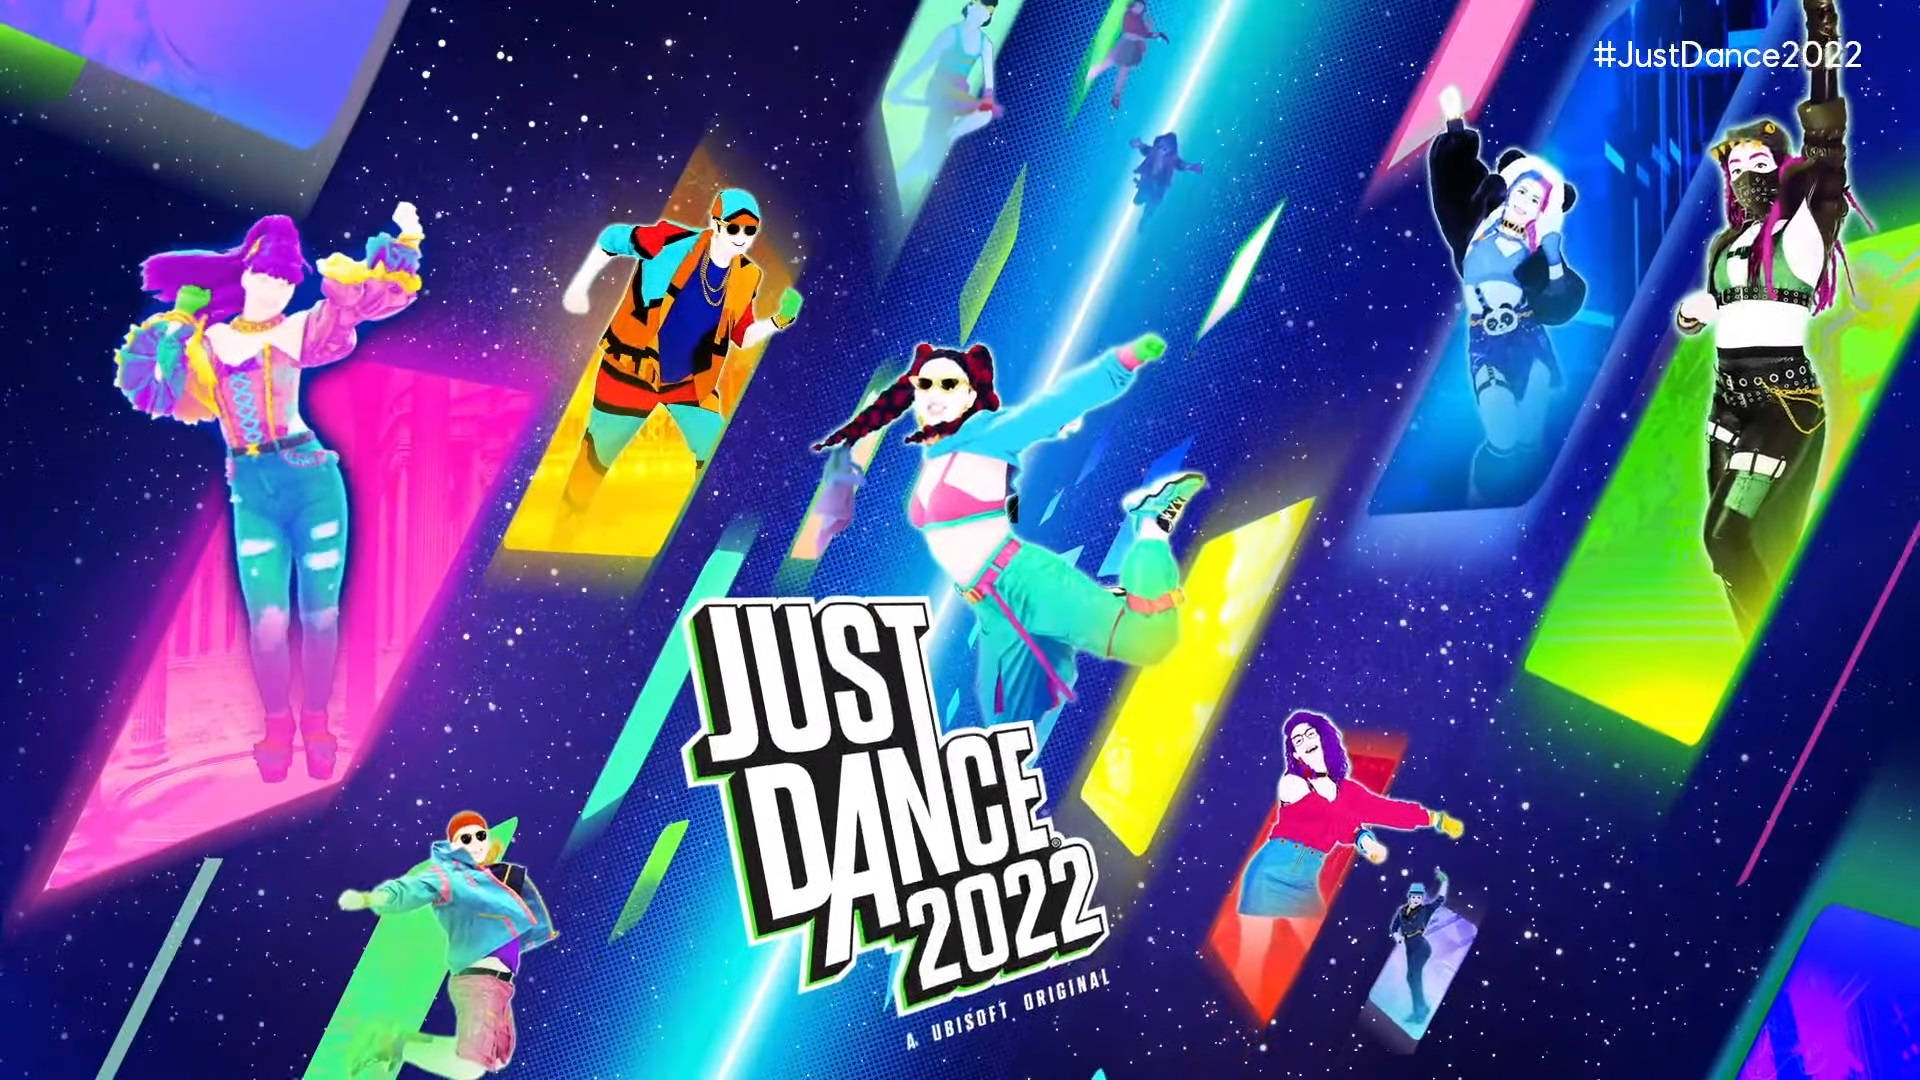 Just Dance 2022 Dancers Out Of Squares Background